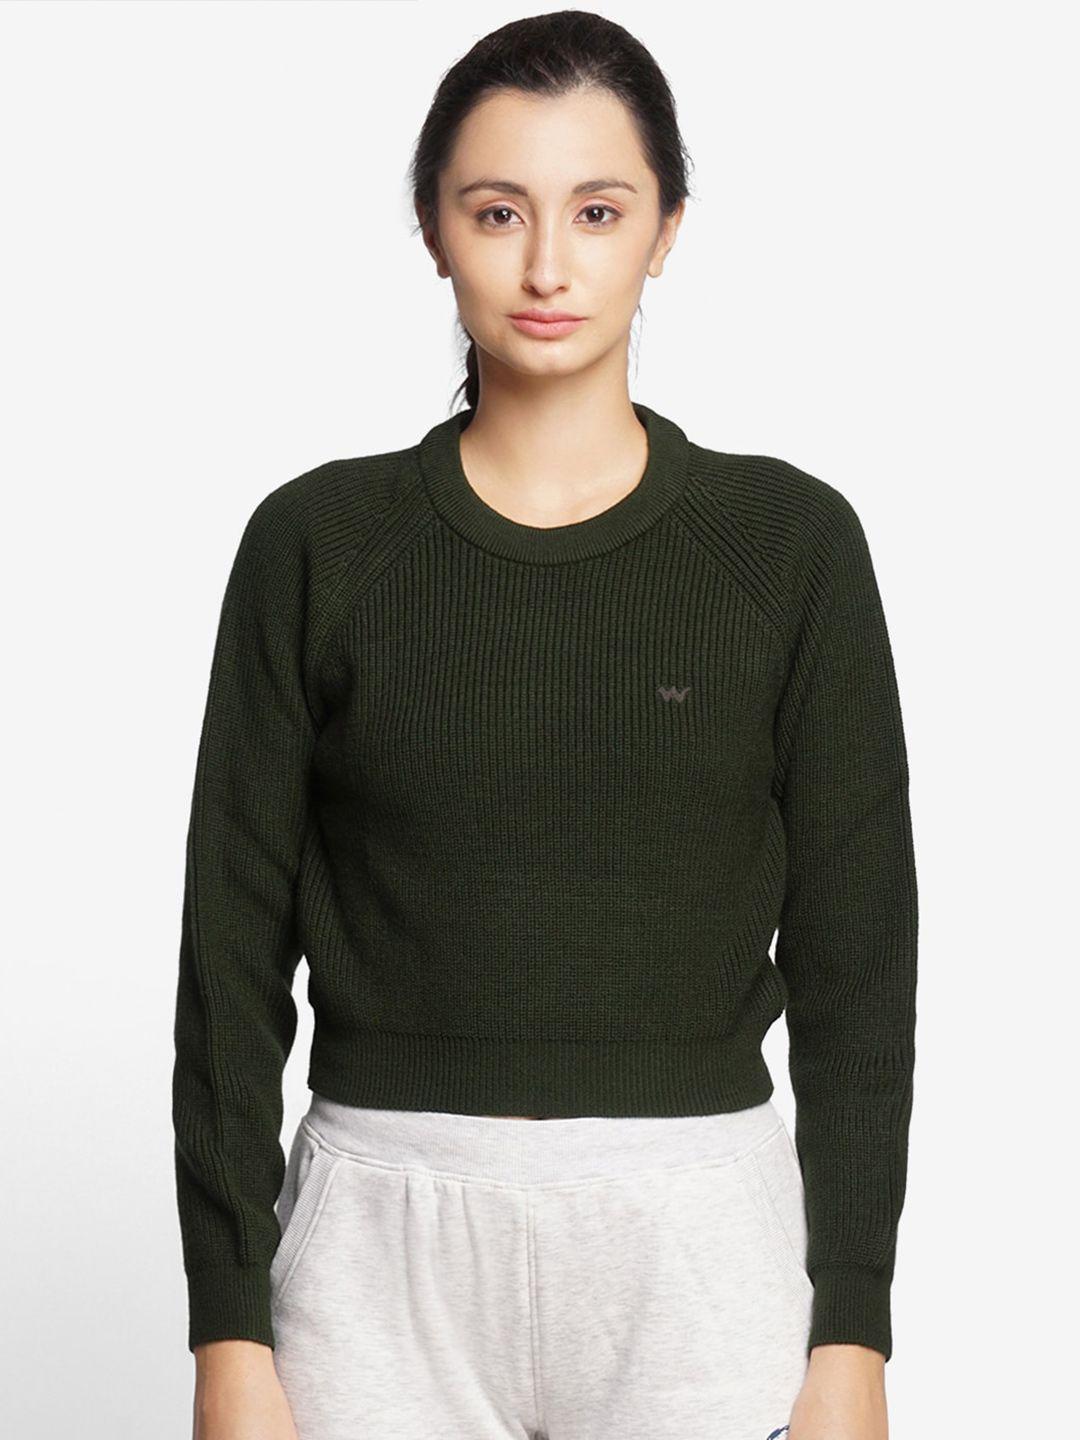 wildcraft women olive green ribbed acrylic pullover